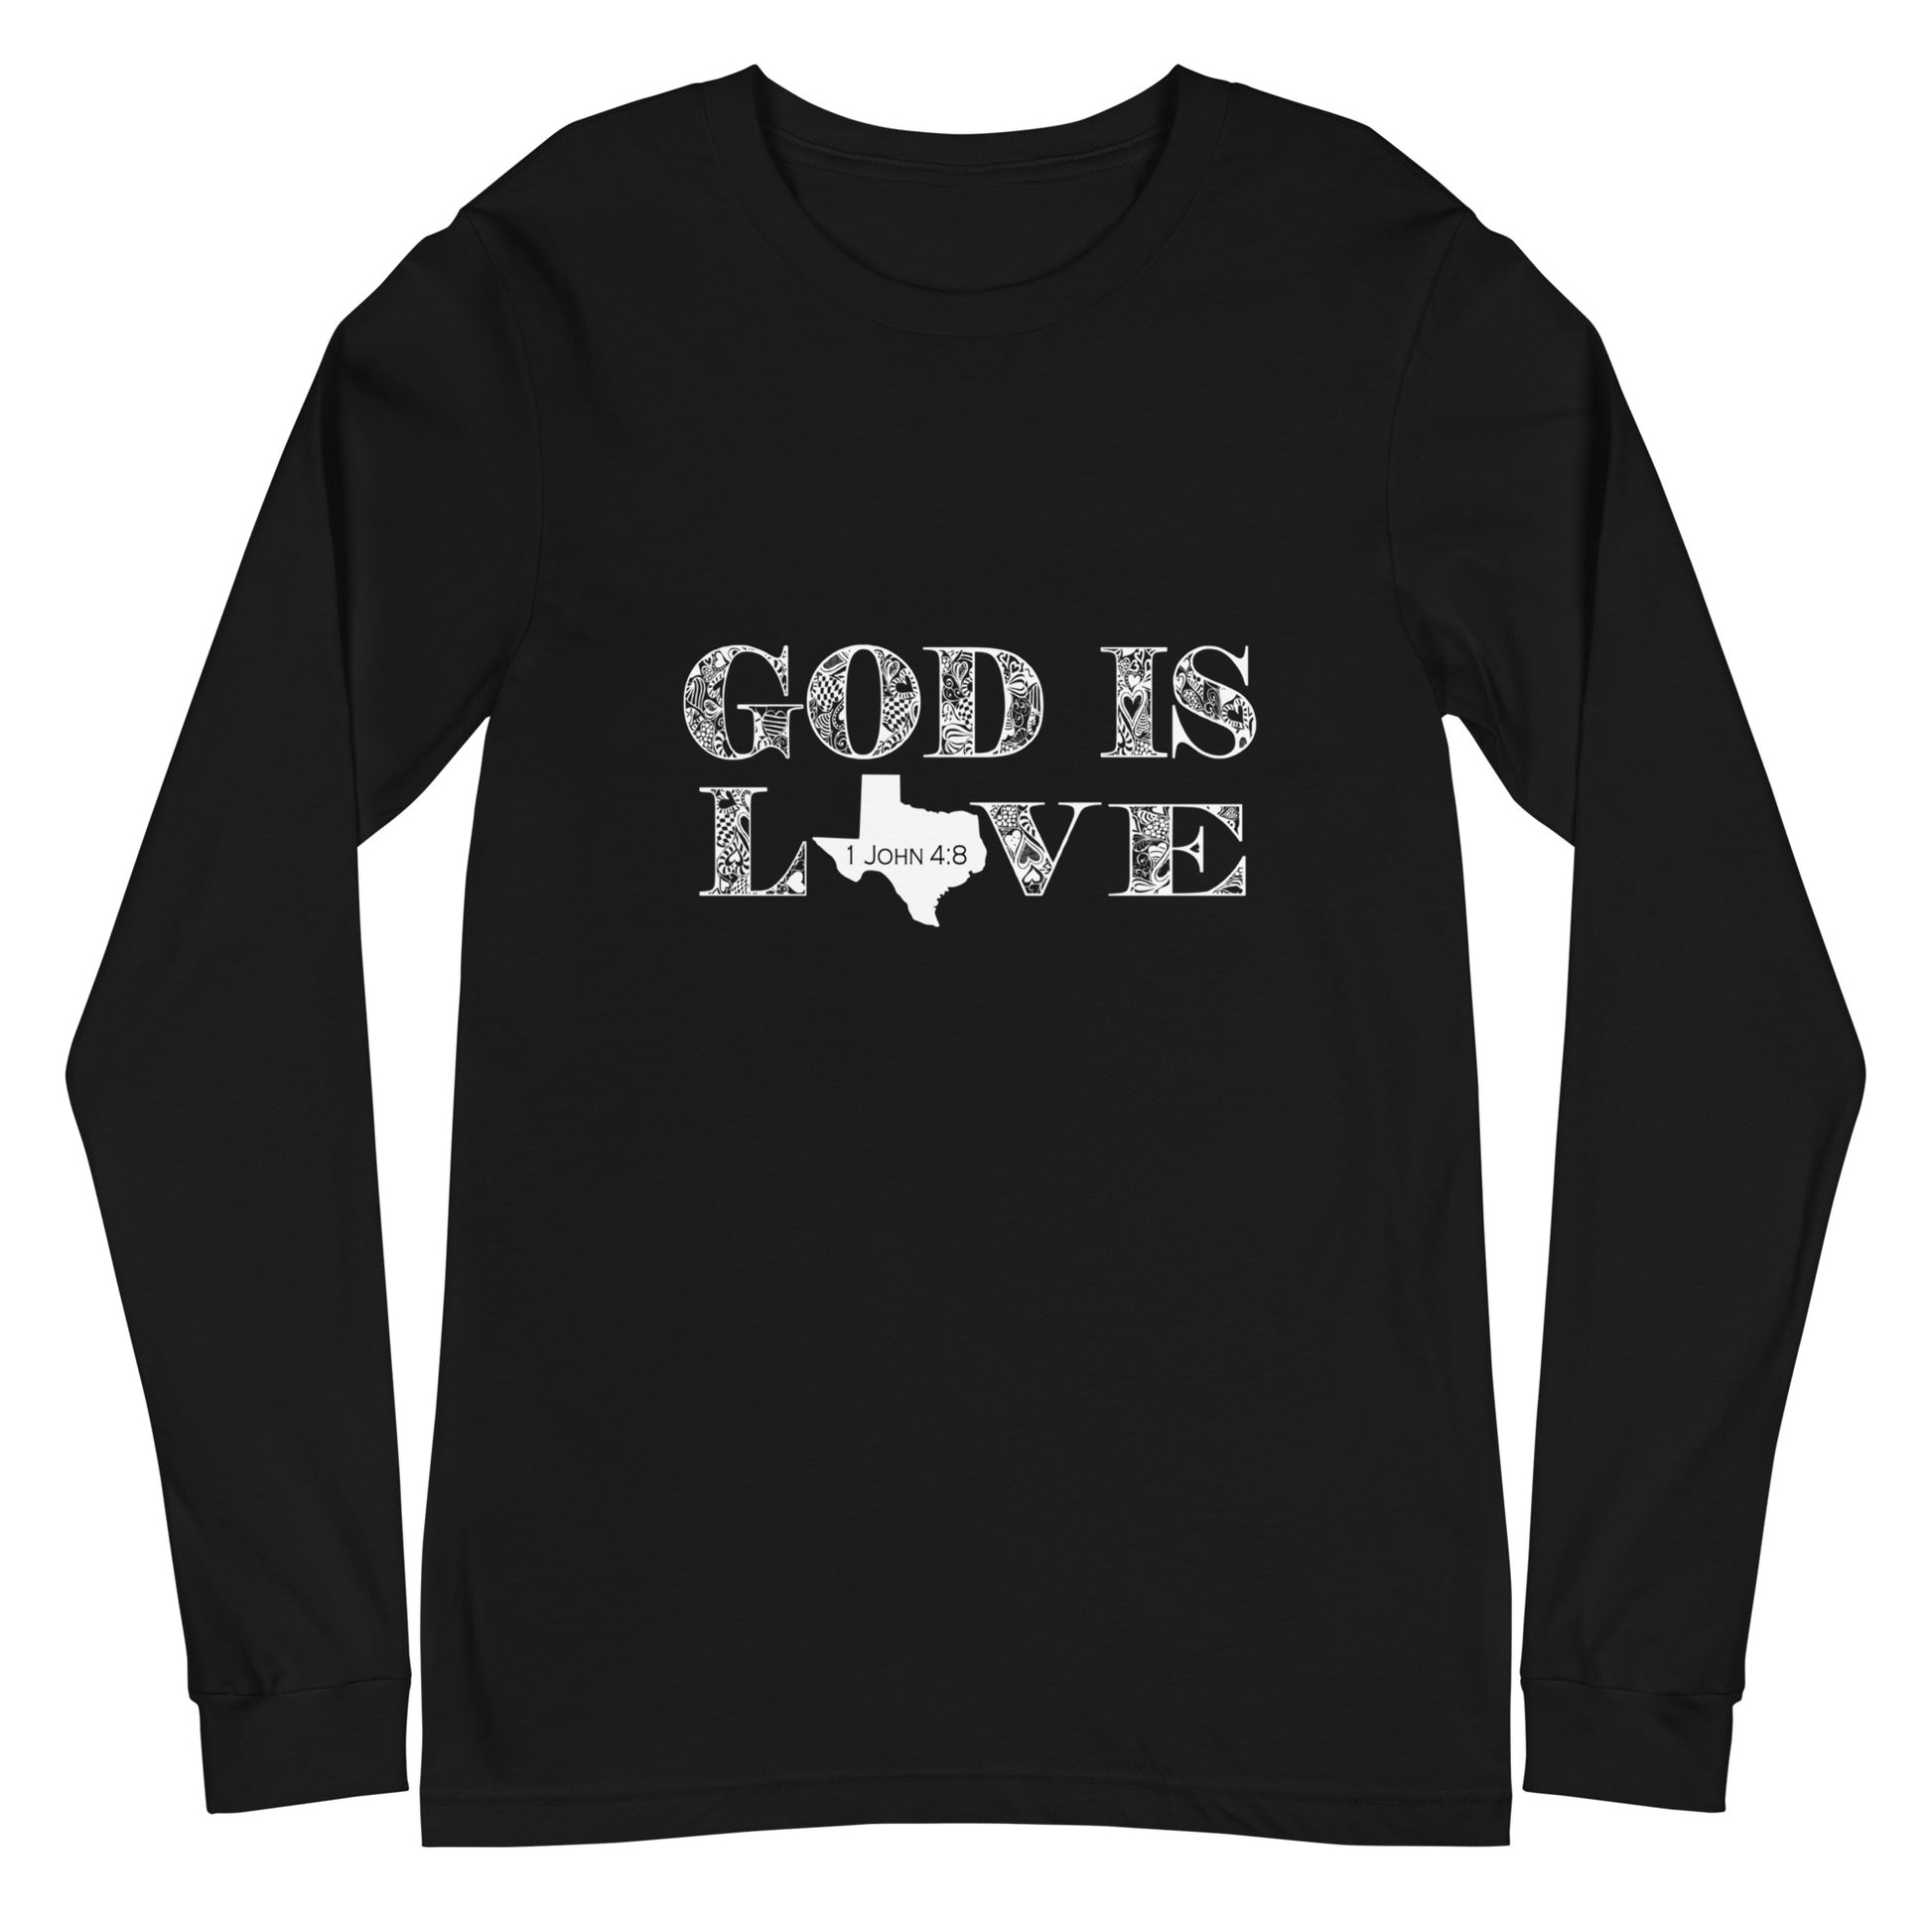 Graphic Christian black long-sleeve tee with 1 John 4:8 on it. This piece of Christian apparel is a reminder of who God is. Grab this unique long-sleeve tee from the Christian-based company Olive Grove Life.